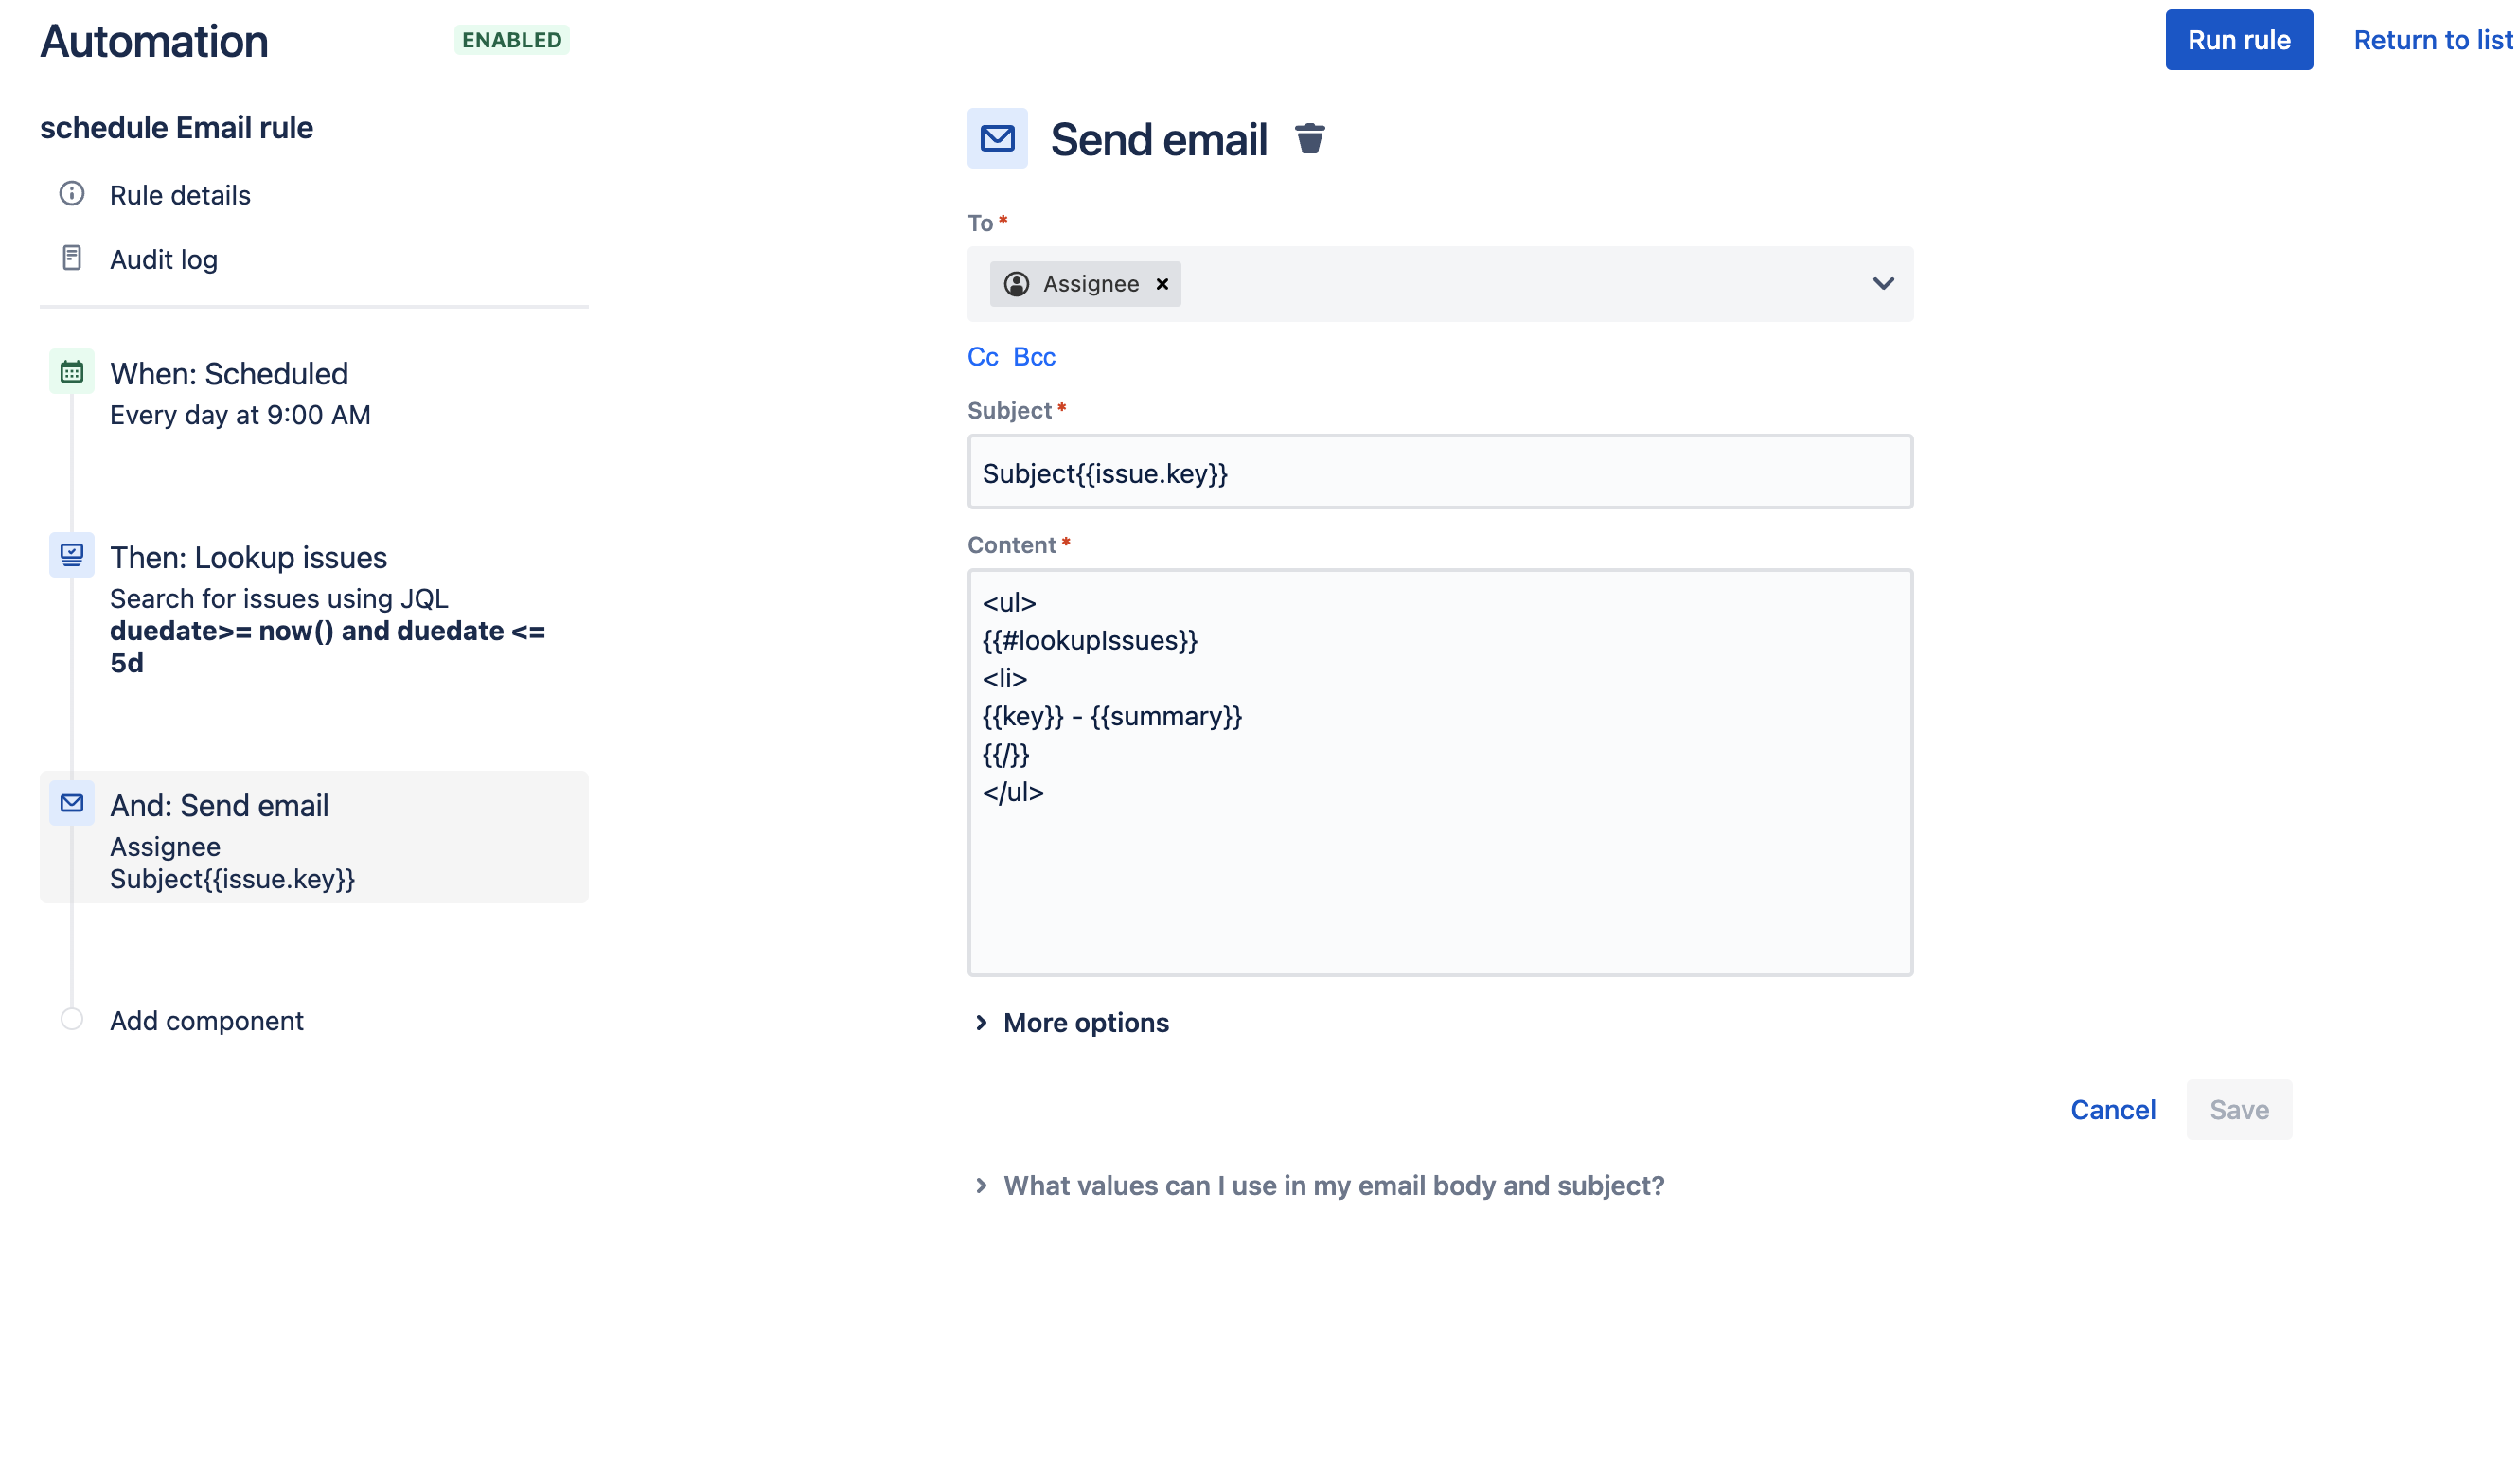 Send email action